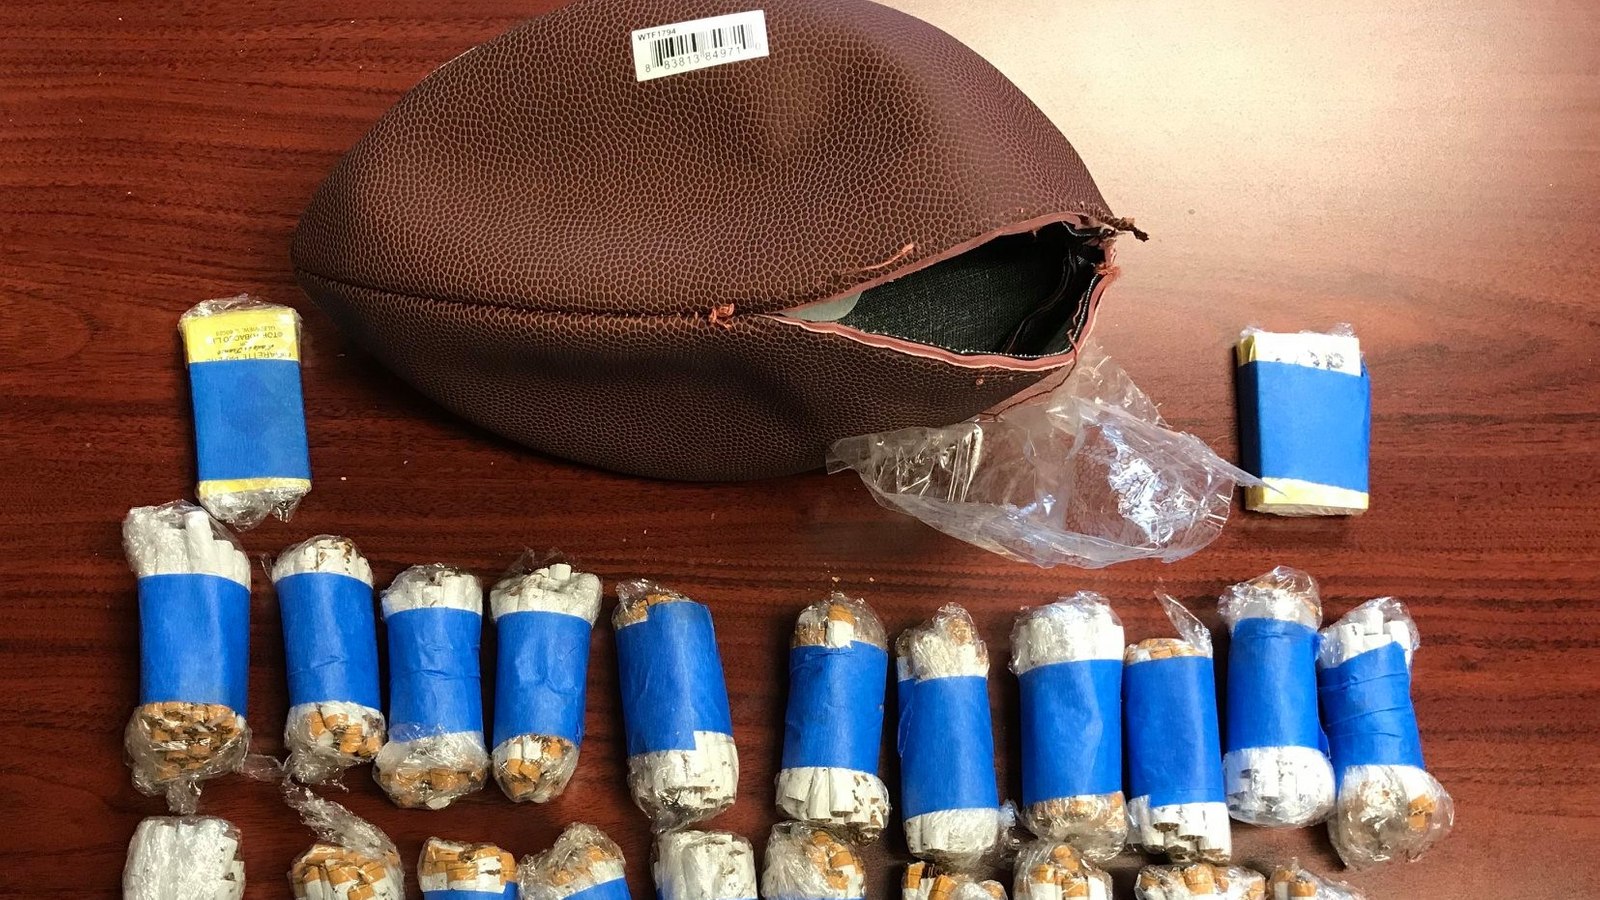 Ga. man arrested outside prison with three contraband stuffed footballs